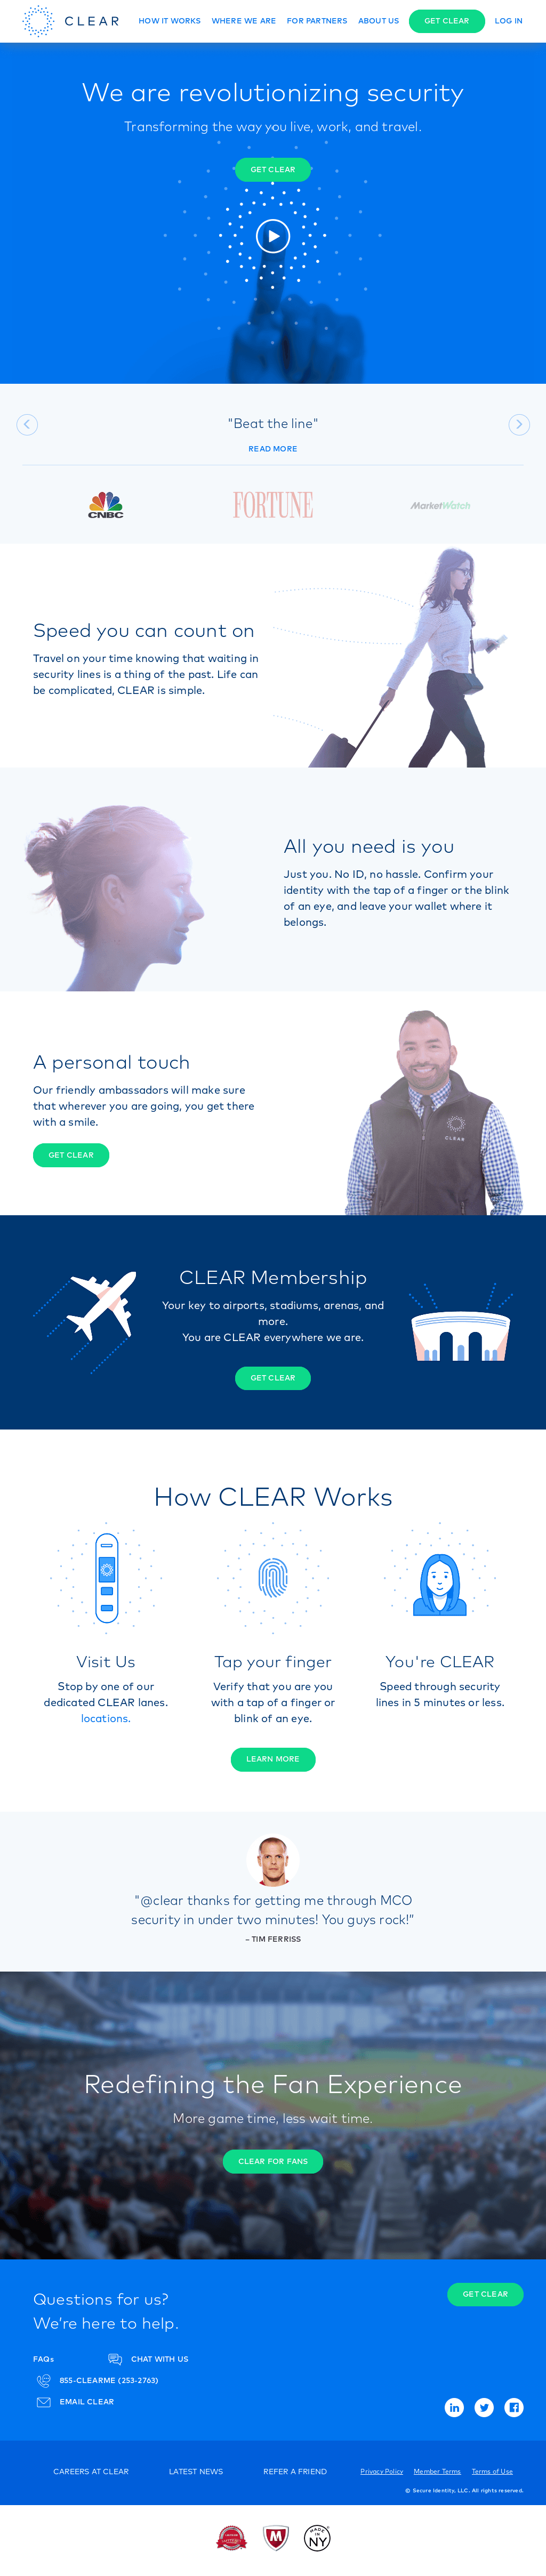 Clear Me Logo - CLEAR Competitors, Revenue and Employees Company Profile